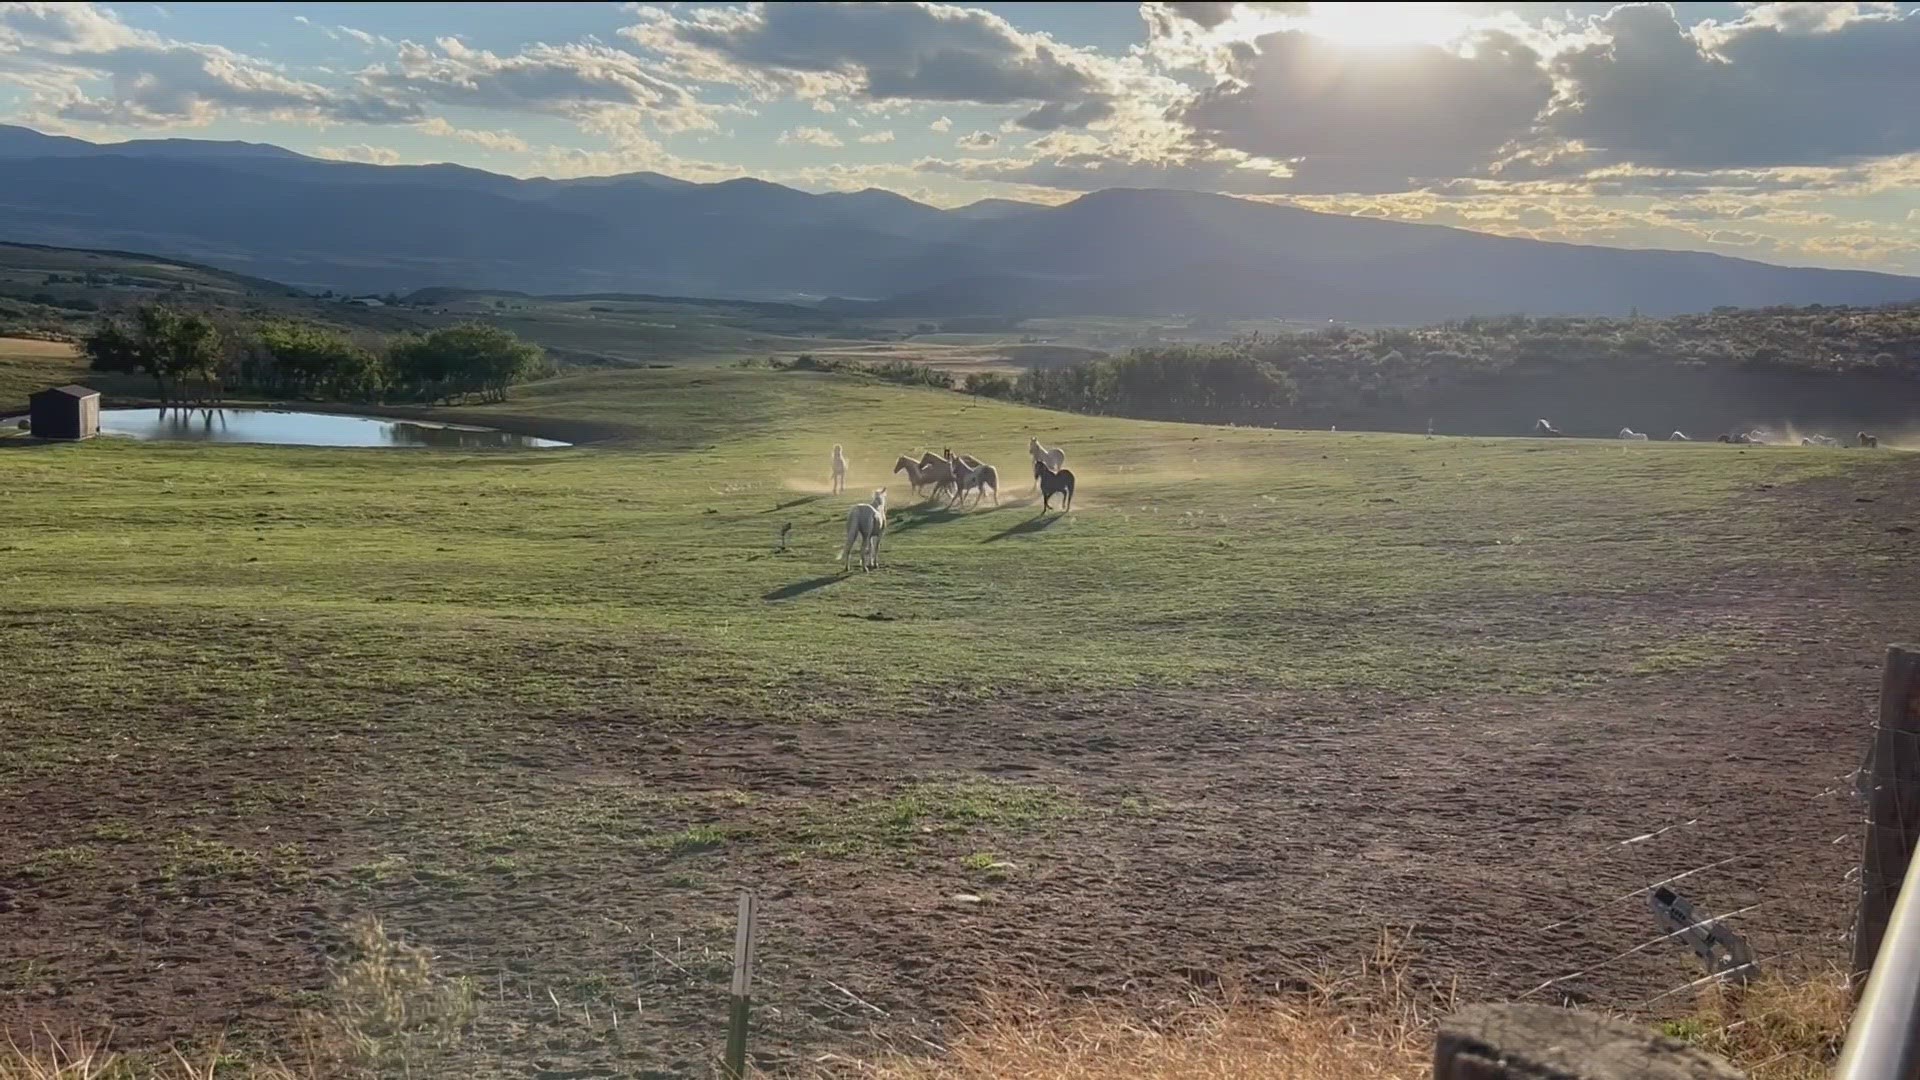 Sailor Moon was taken to a ranch at the base of Aspen, Colorado, and reunited with its herd.